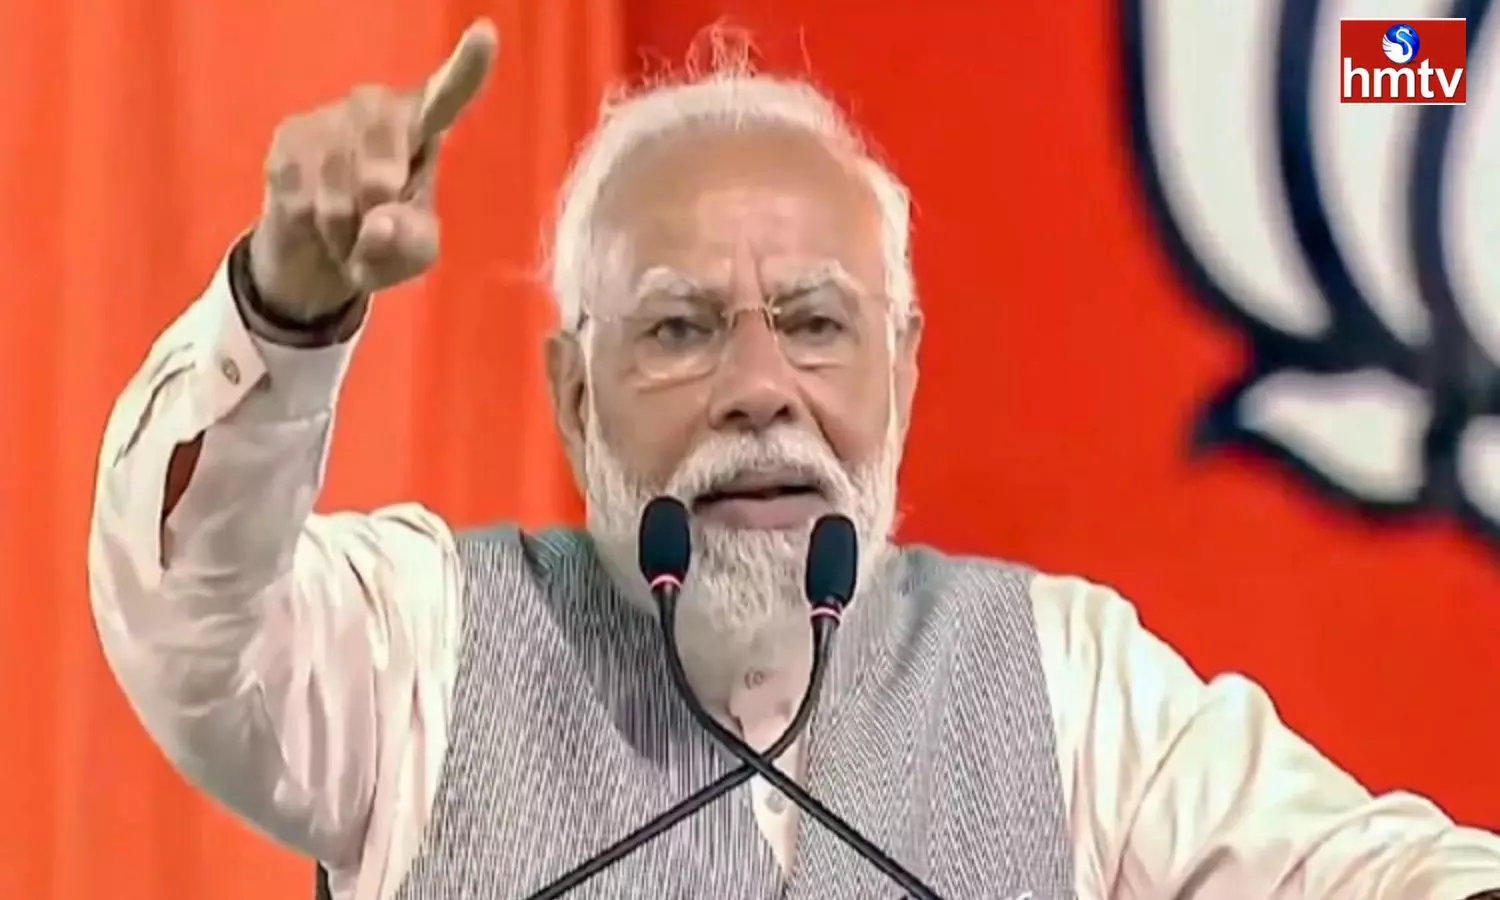 We Are Working 24 Hours For 2047 Vision Says Narendra Modi